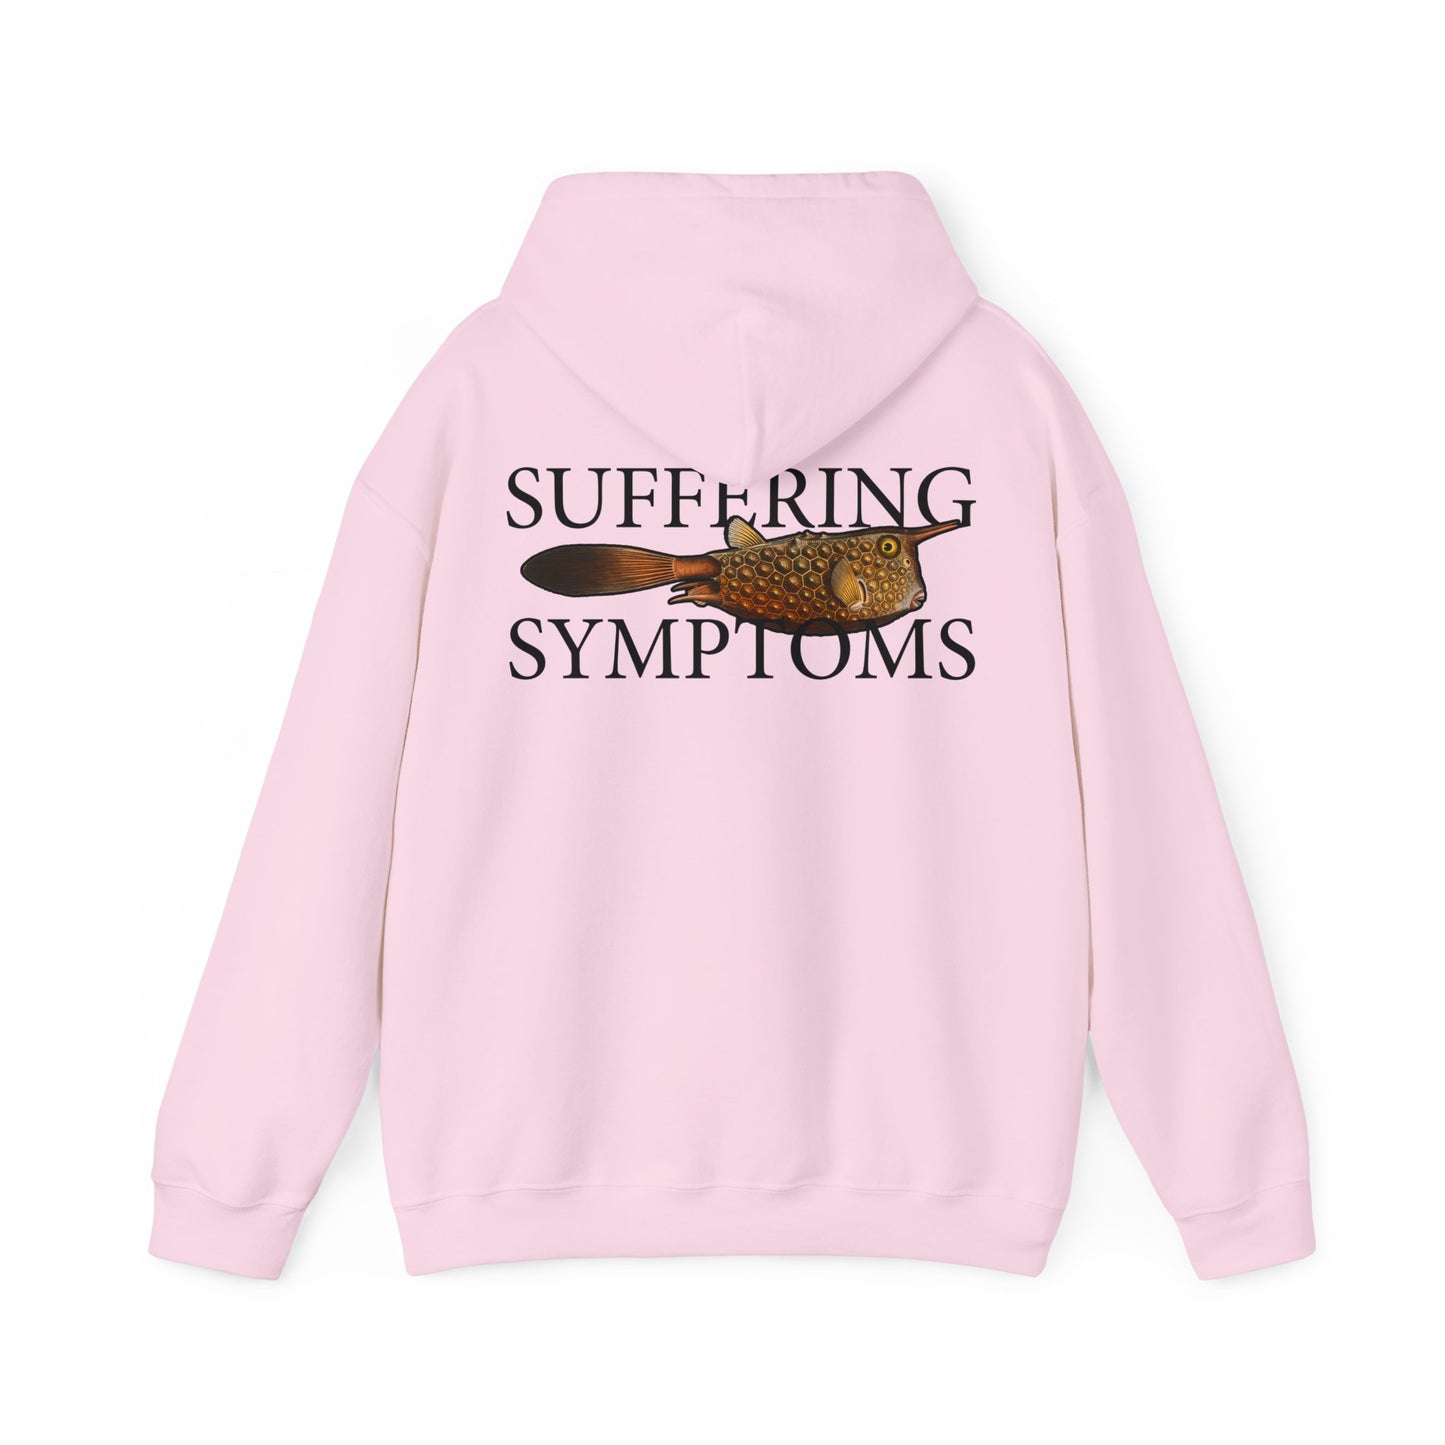 Suffering Symptoms - Hooded Edition